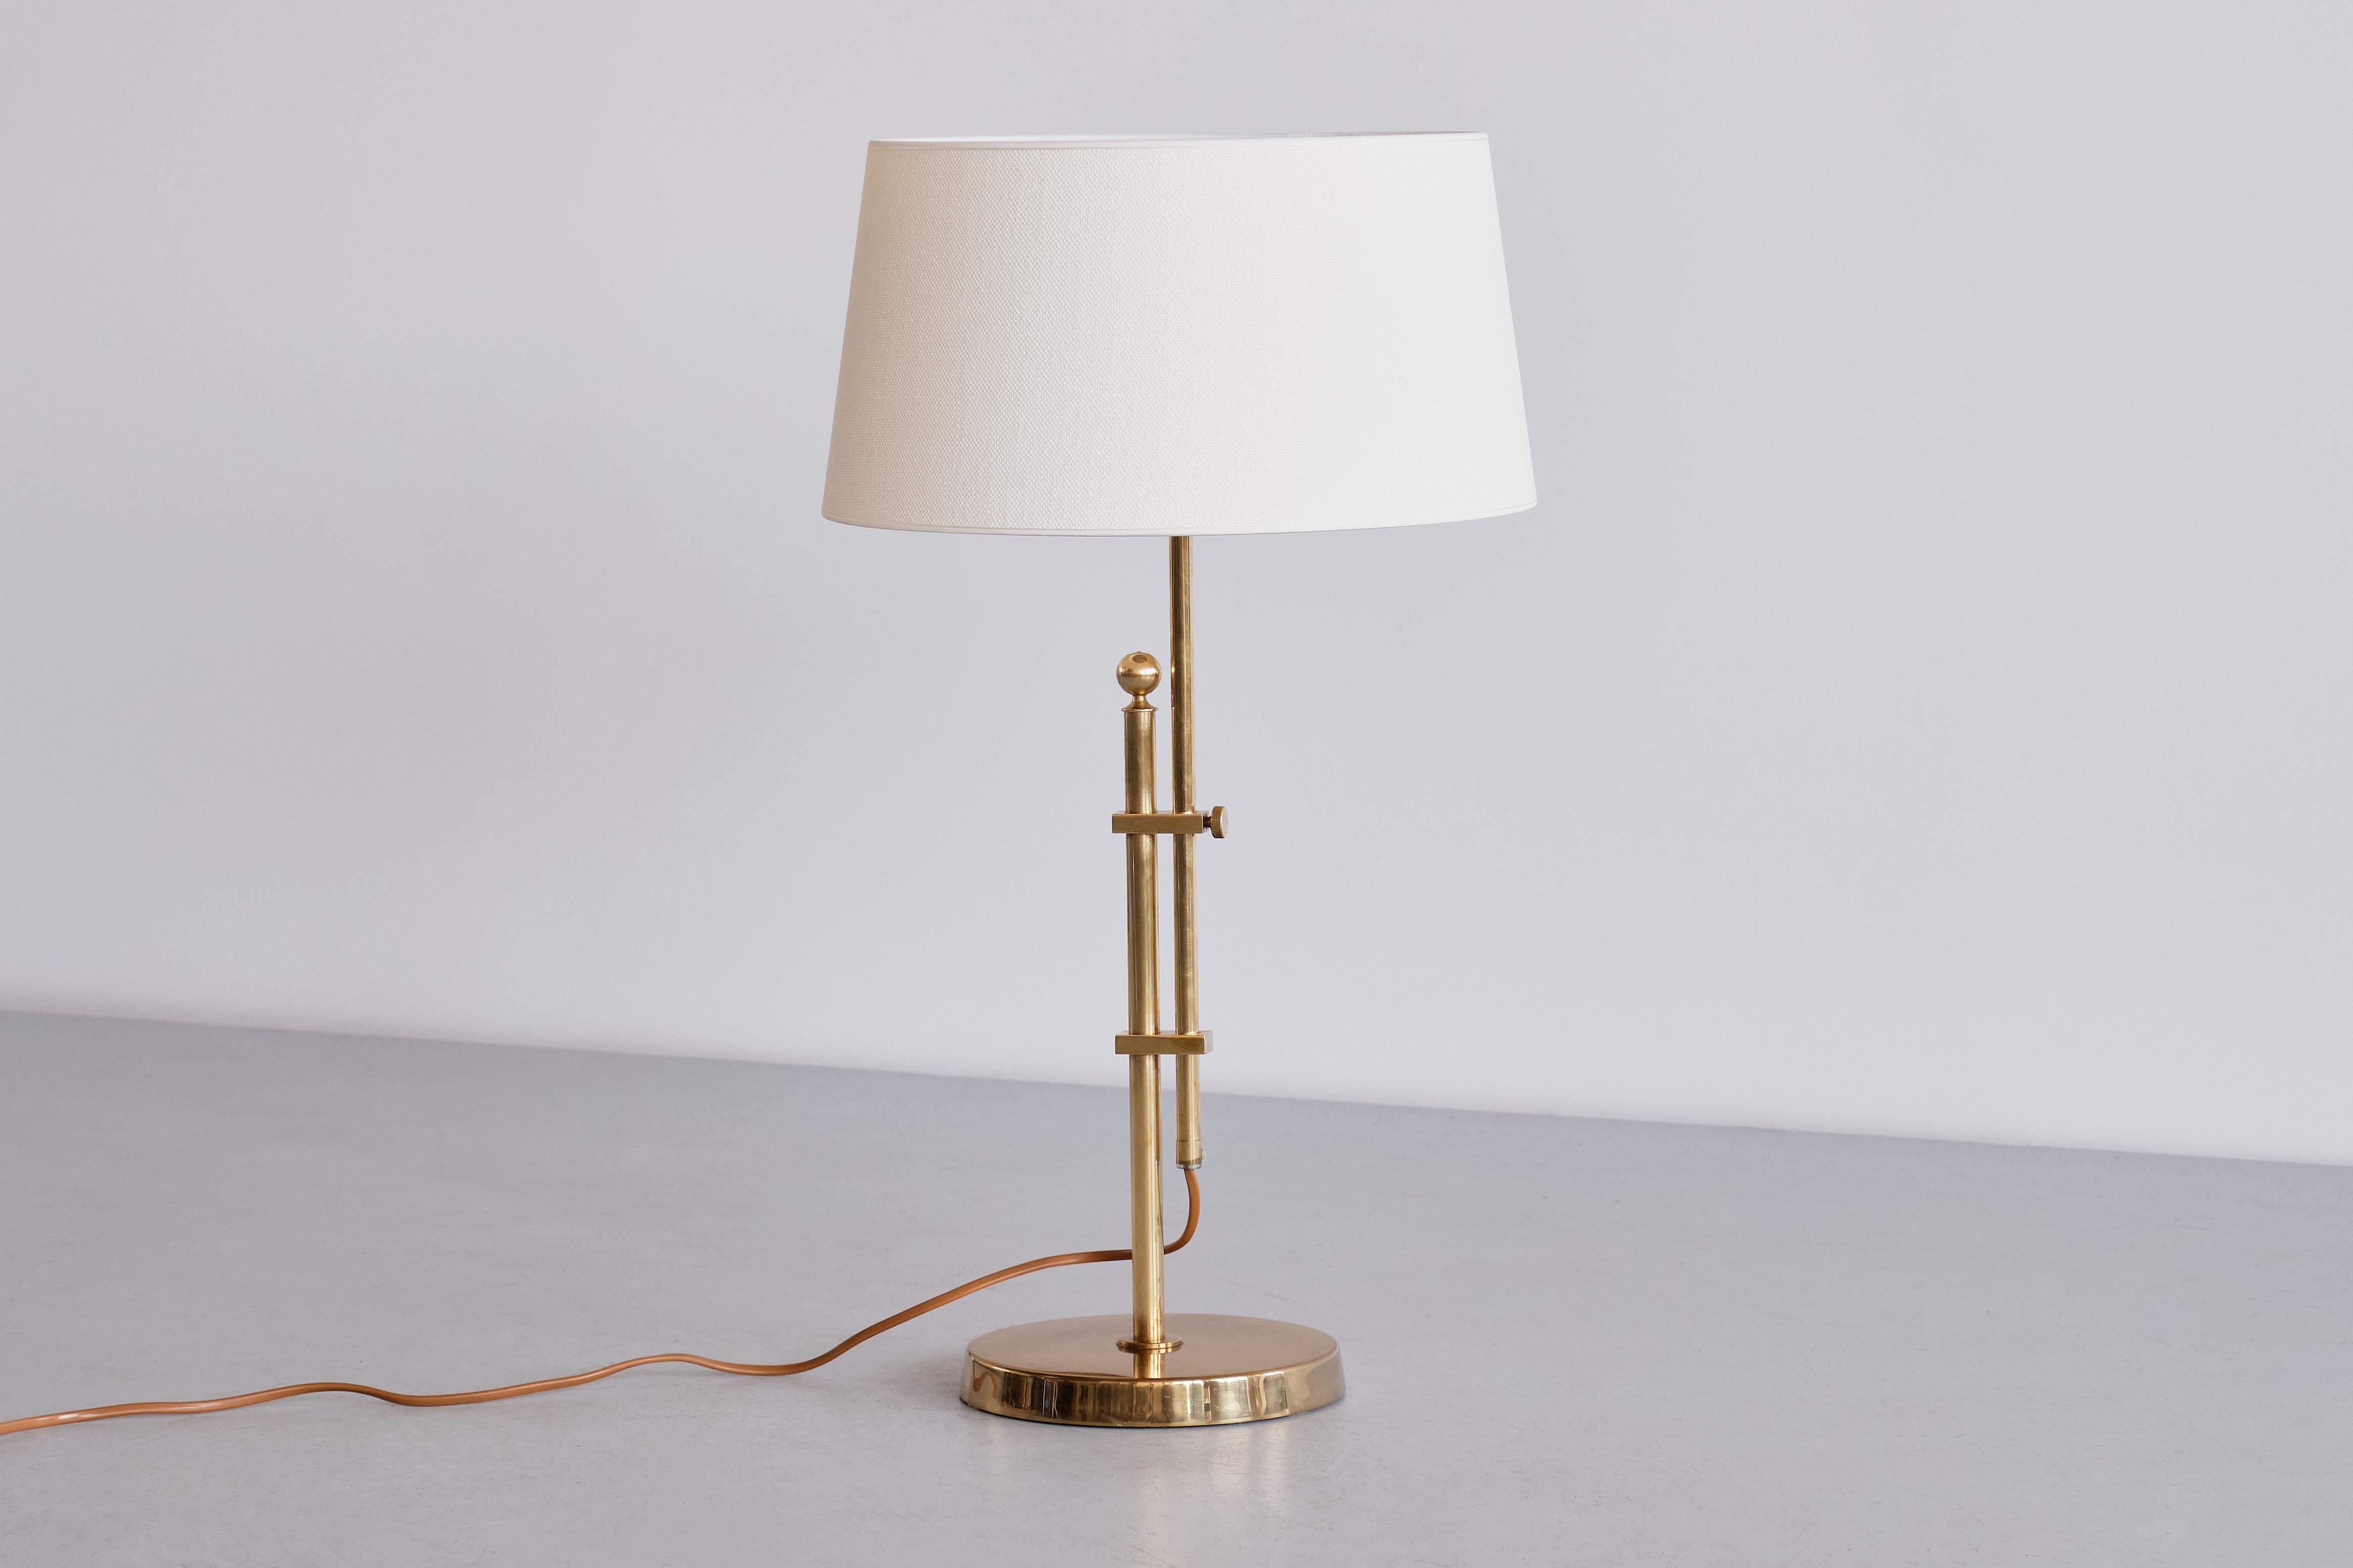 Bergboms B-131 Height Adjustable Table Lamp in Brass, Sweden, 1950s For Sale 6